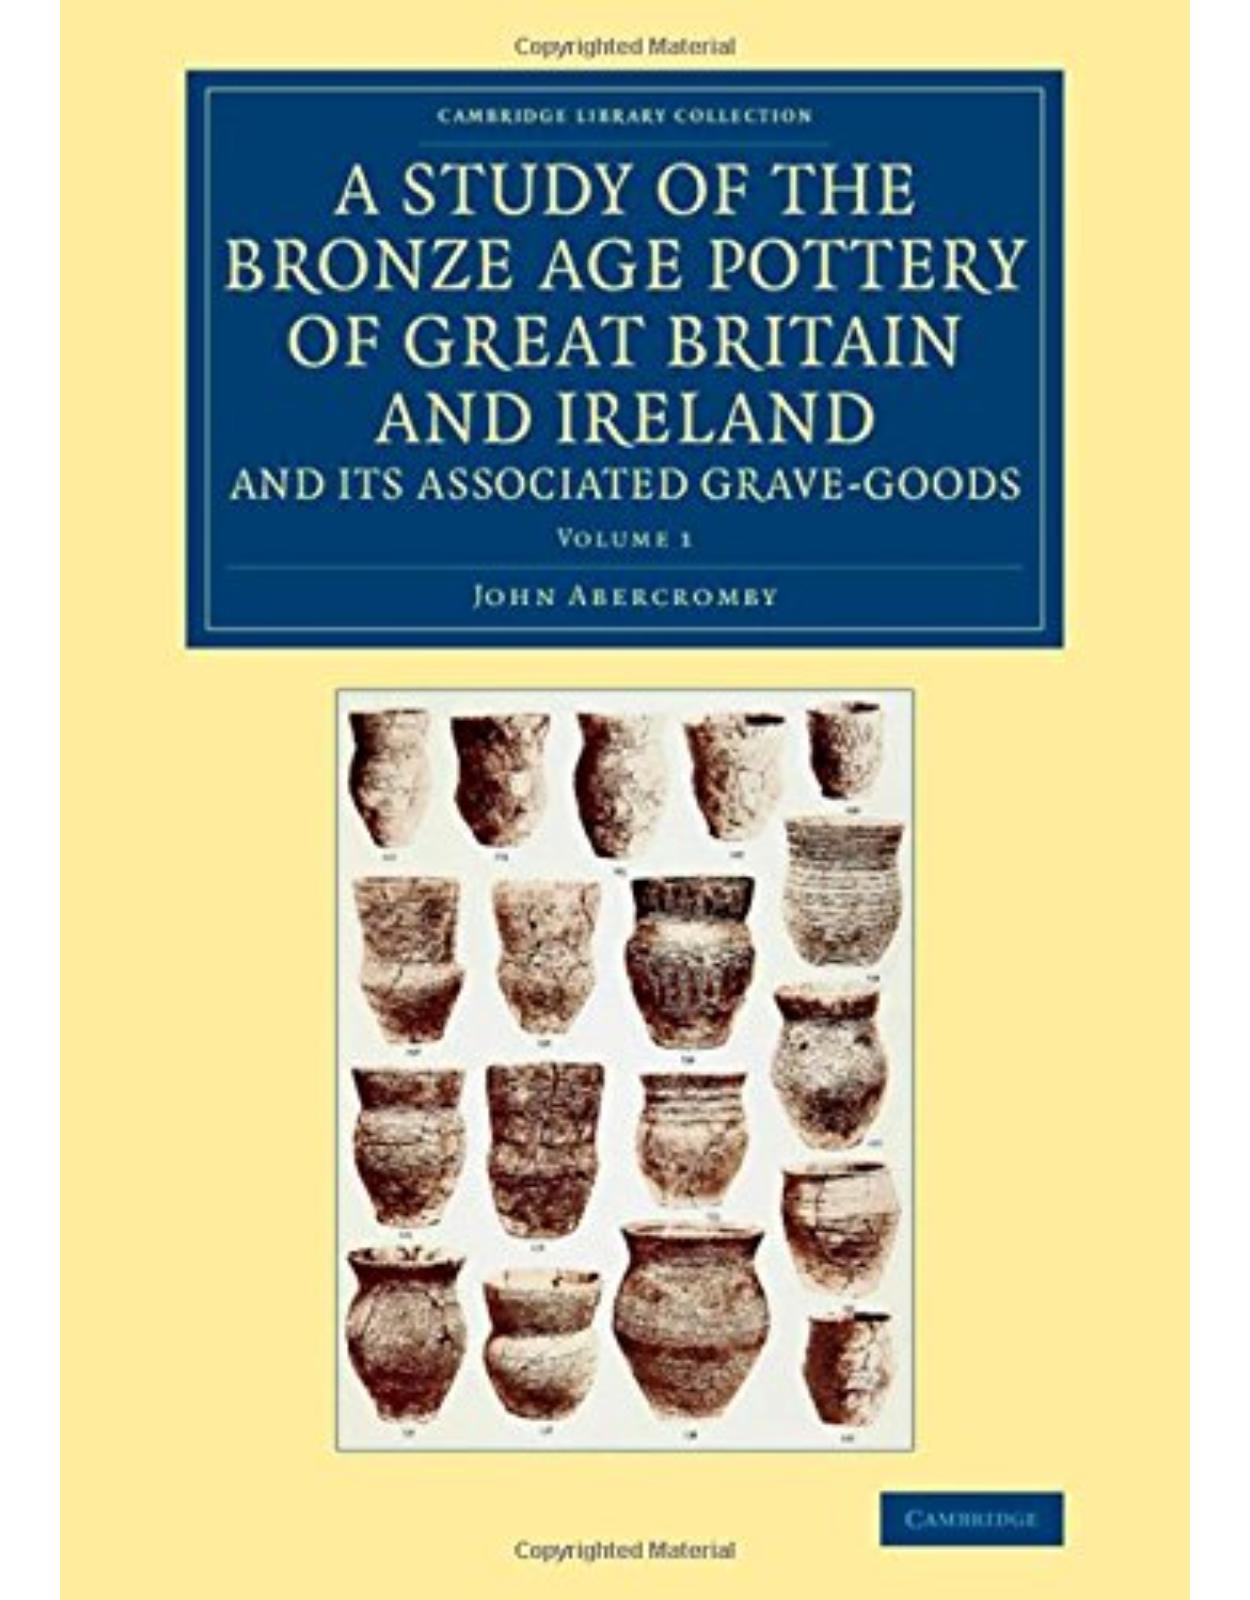 A Study of the Bronze Age Pottery of Great Britain and Ireland and its Associated Grave-Goods: Volume 1 (Cambridge Library Collection - Archaeology)